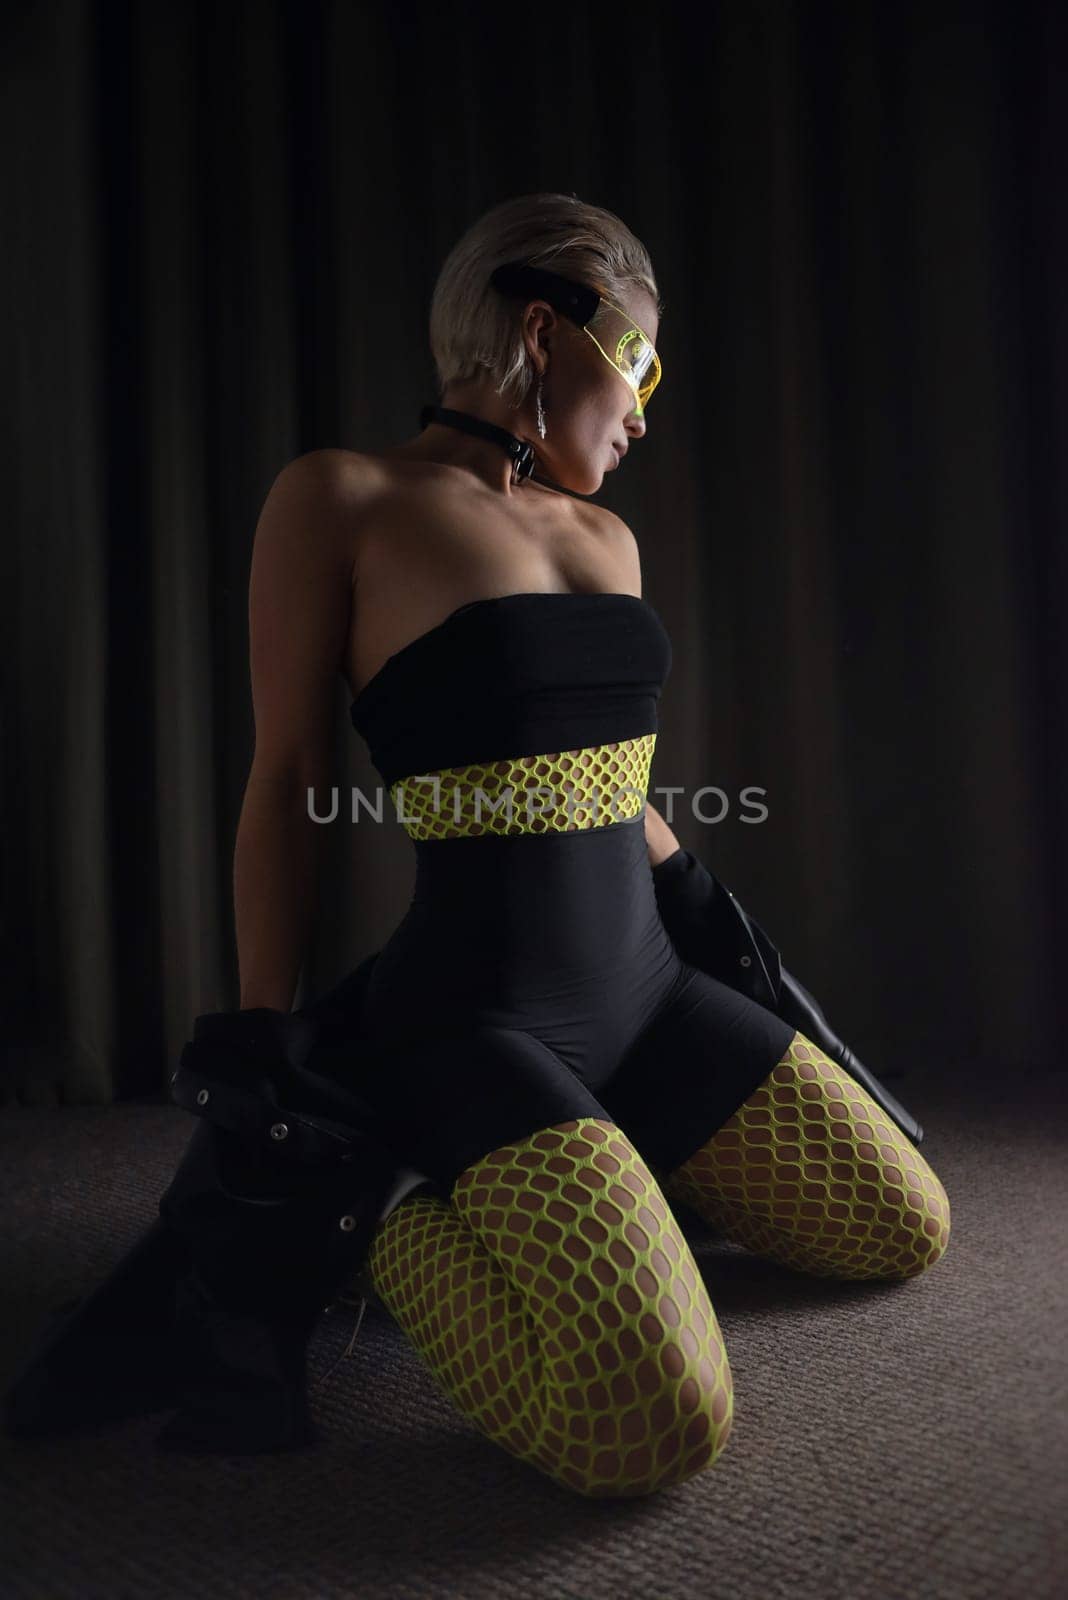 sexy girl in futuristic neon glasses and tight clothes and bright fishnet tights on a dark background in the room